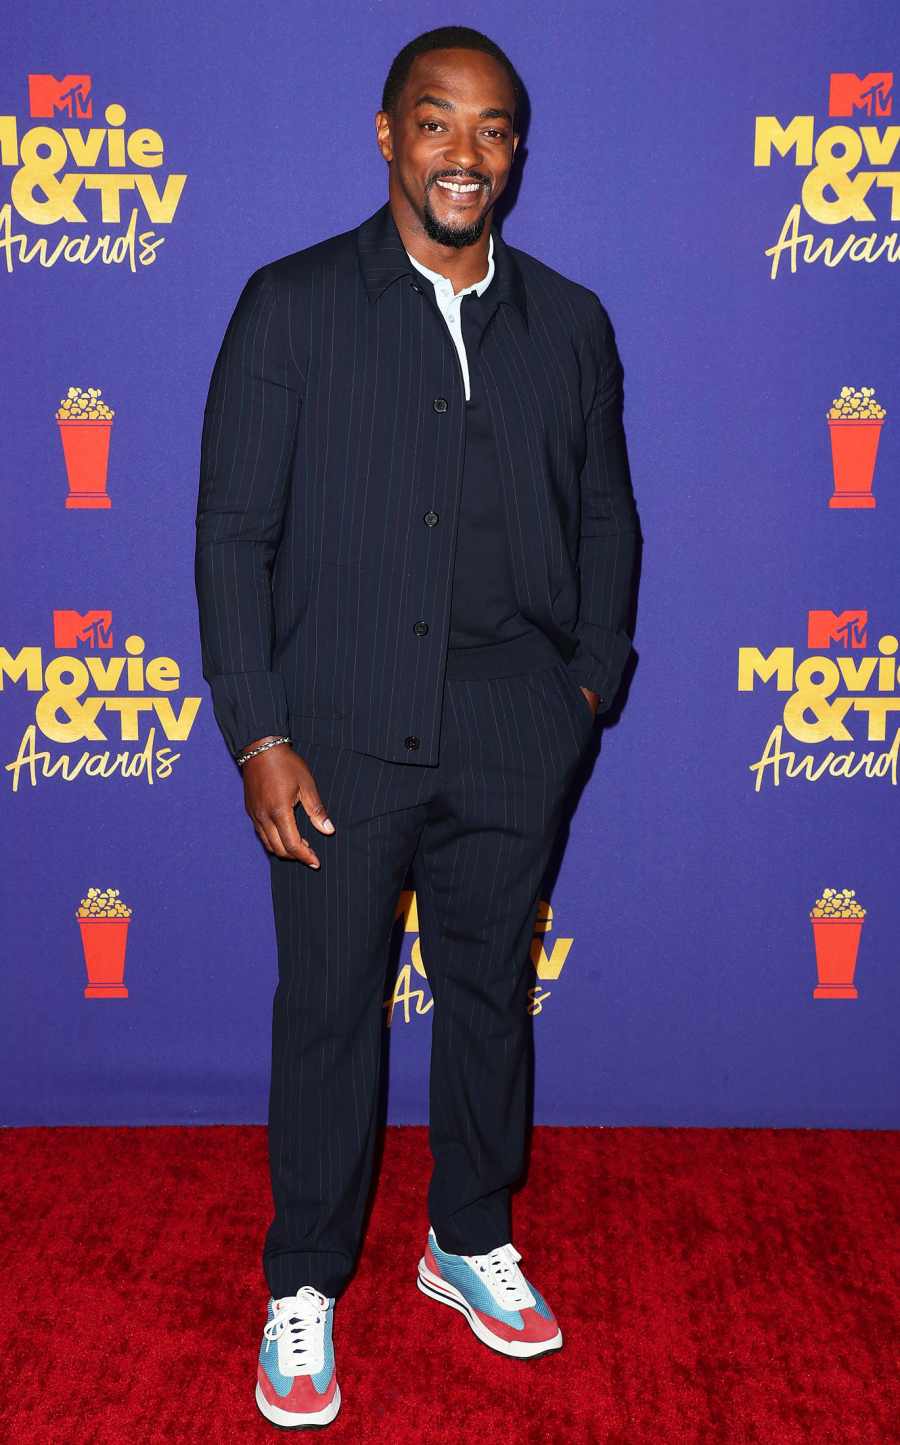 The 8 Hottest Hunks at the MTV Movie & TV Awards